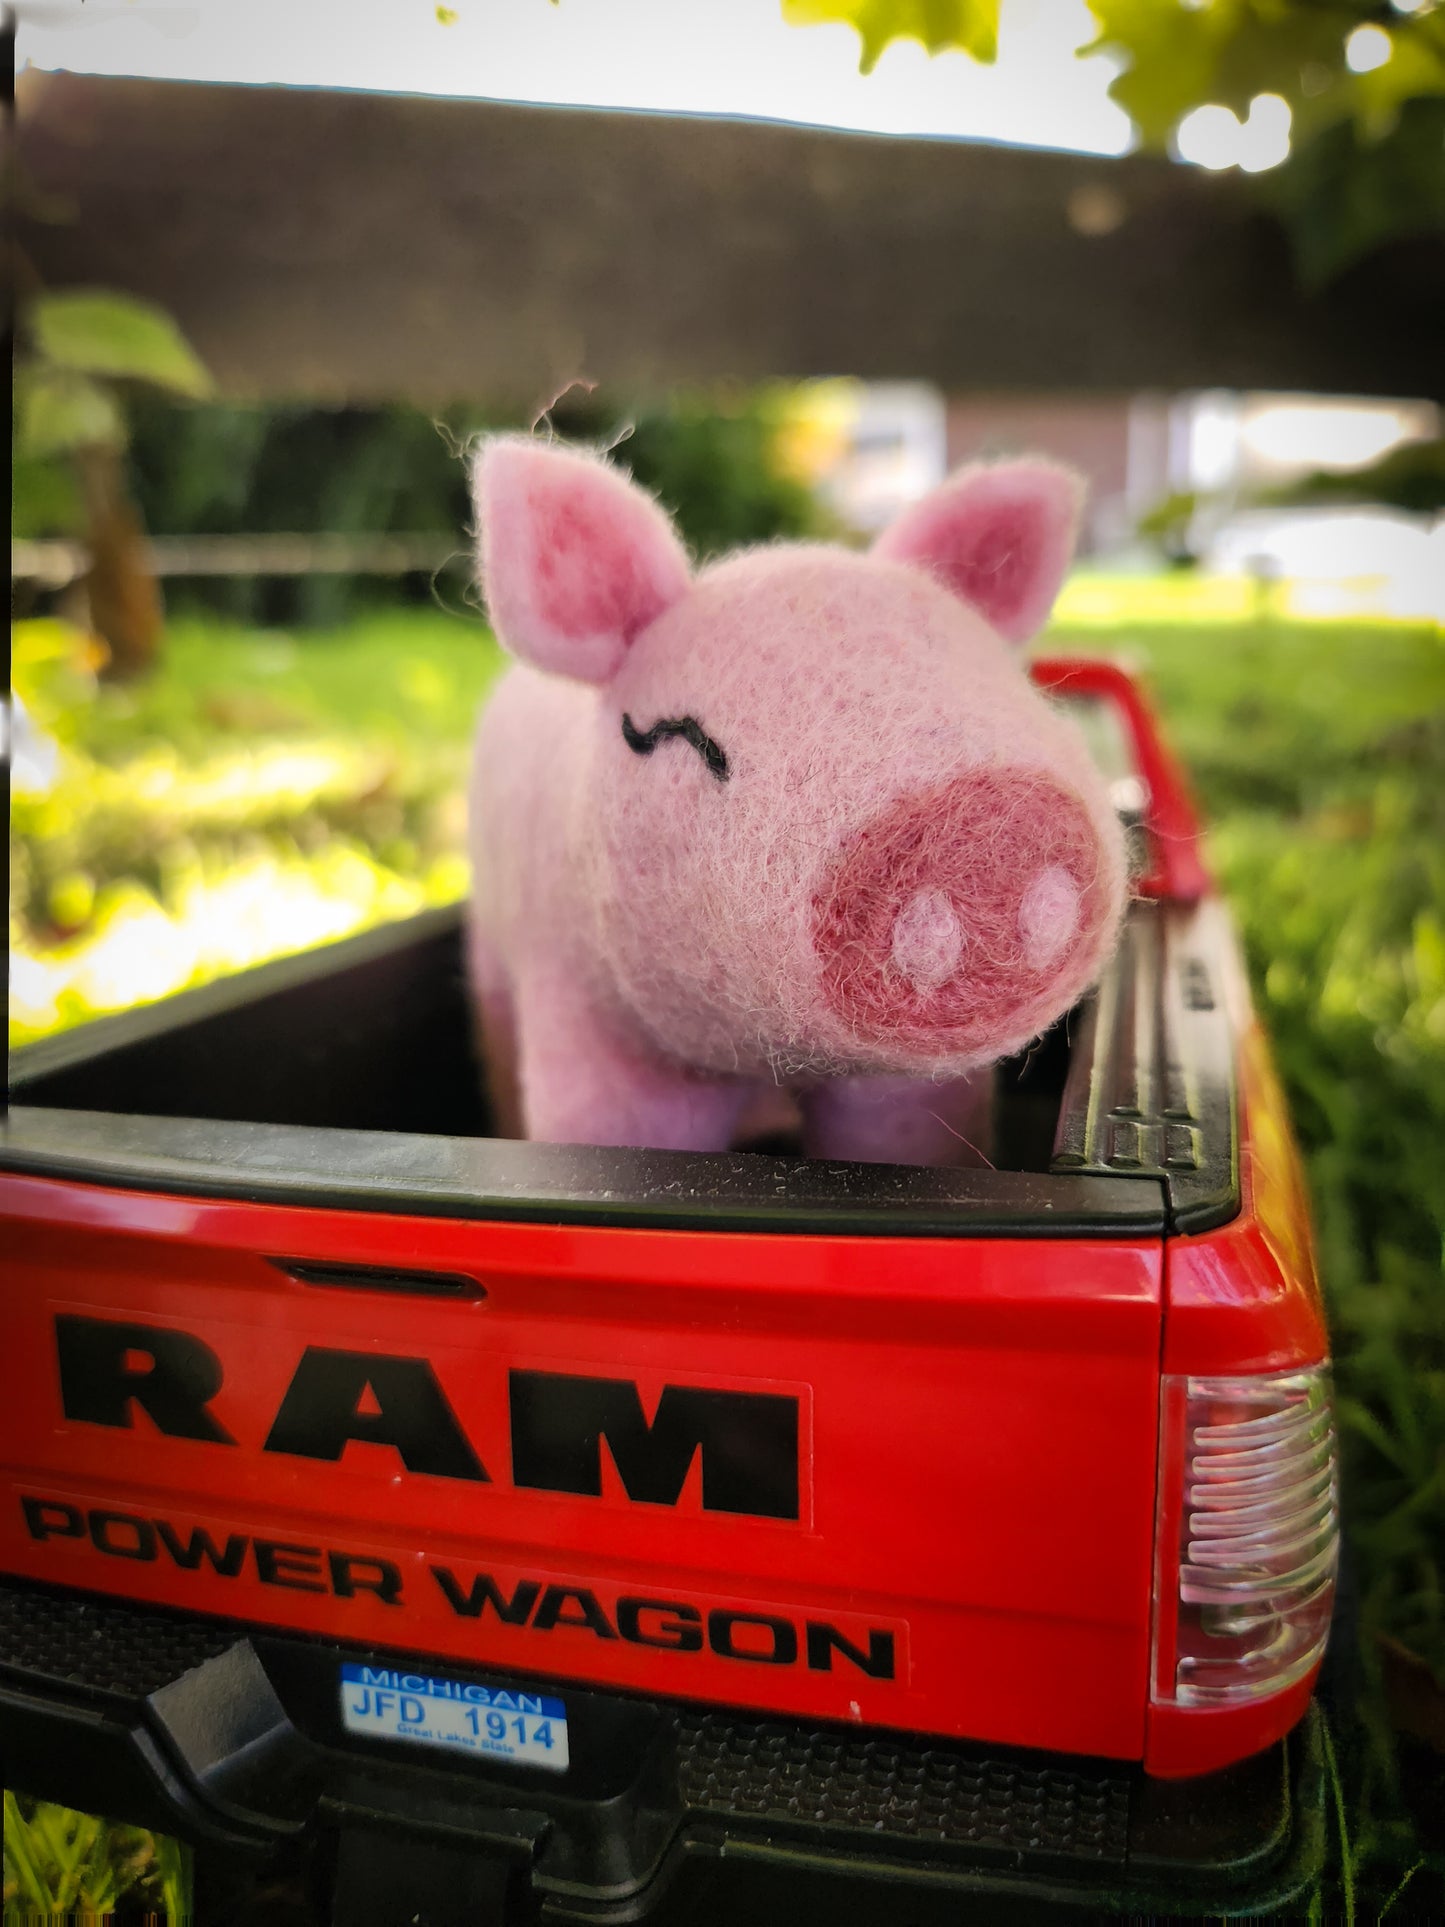 Pippa the Pig - Felt Toy Pig in back of toy ute